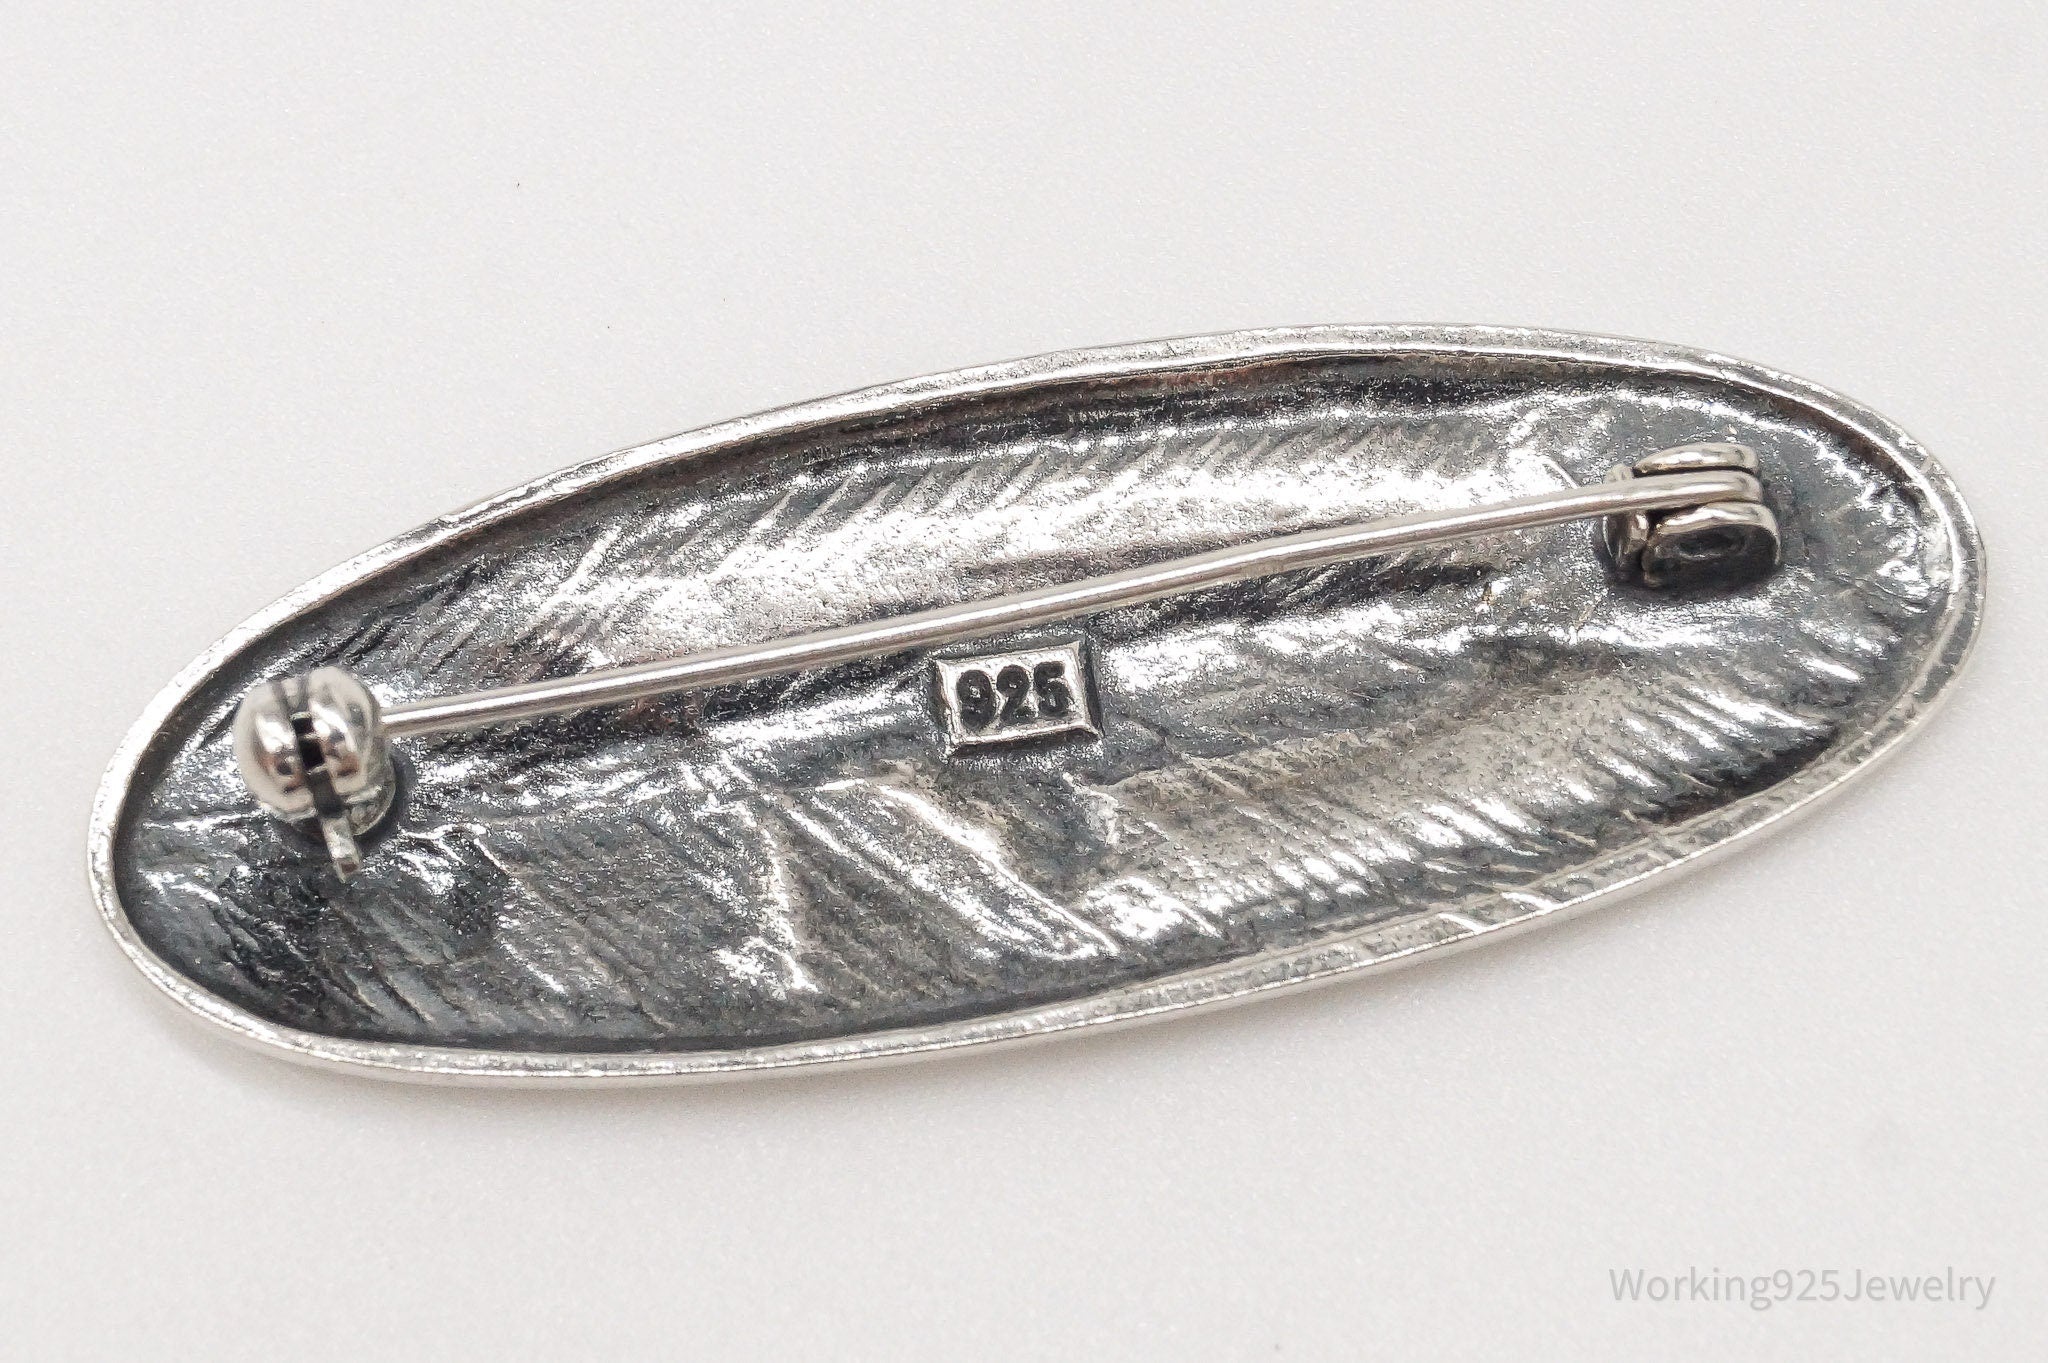 Vintage Art Deco / Mid Century Style Sterling Silver Brooch Pin